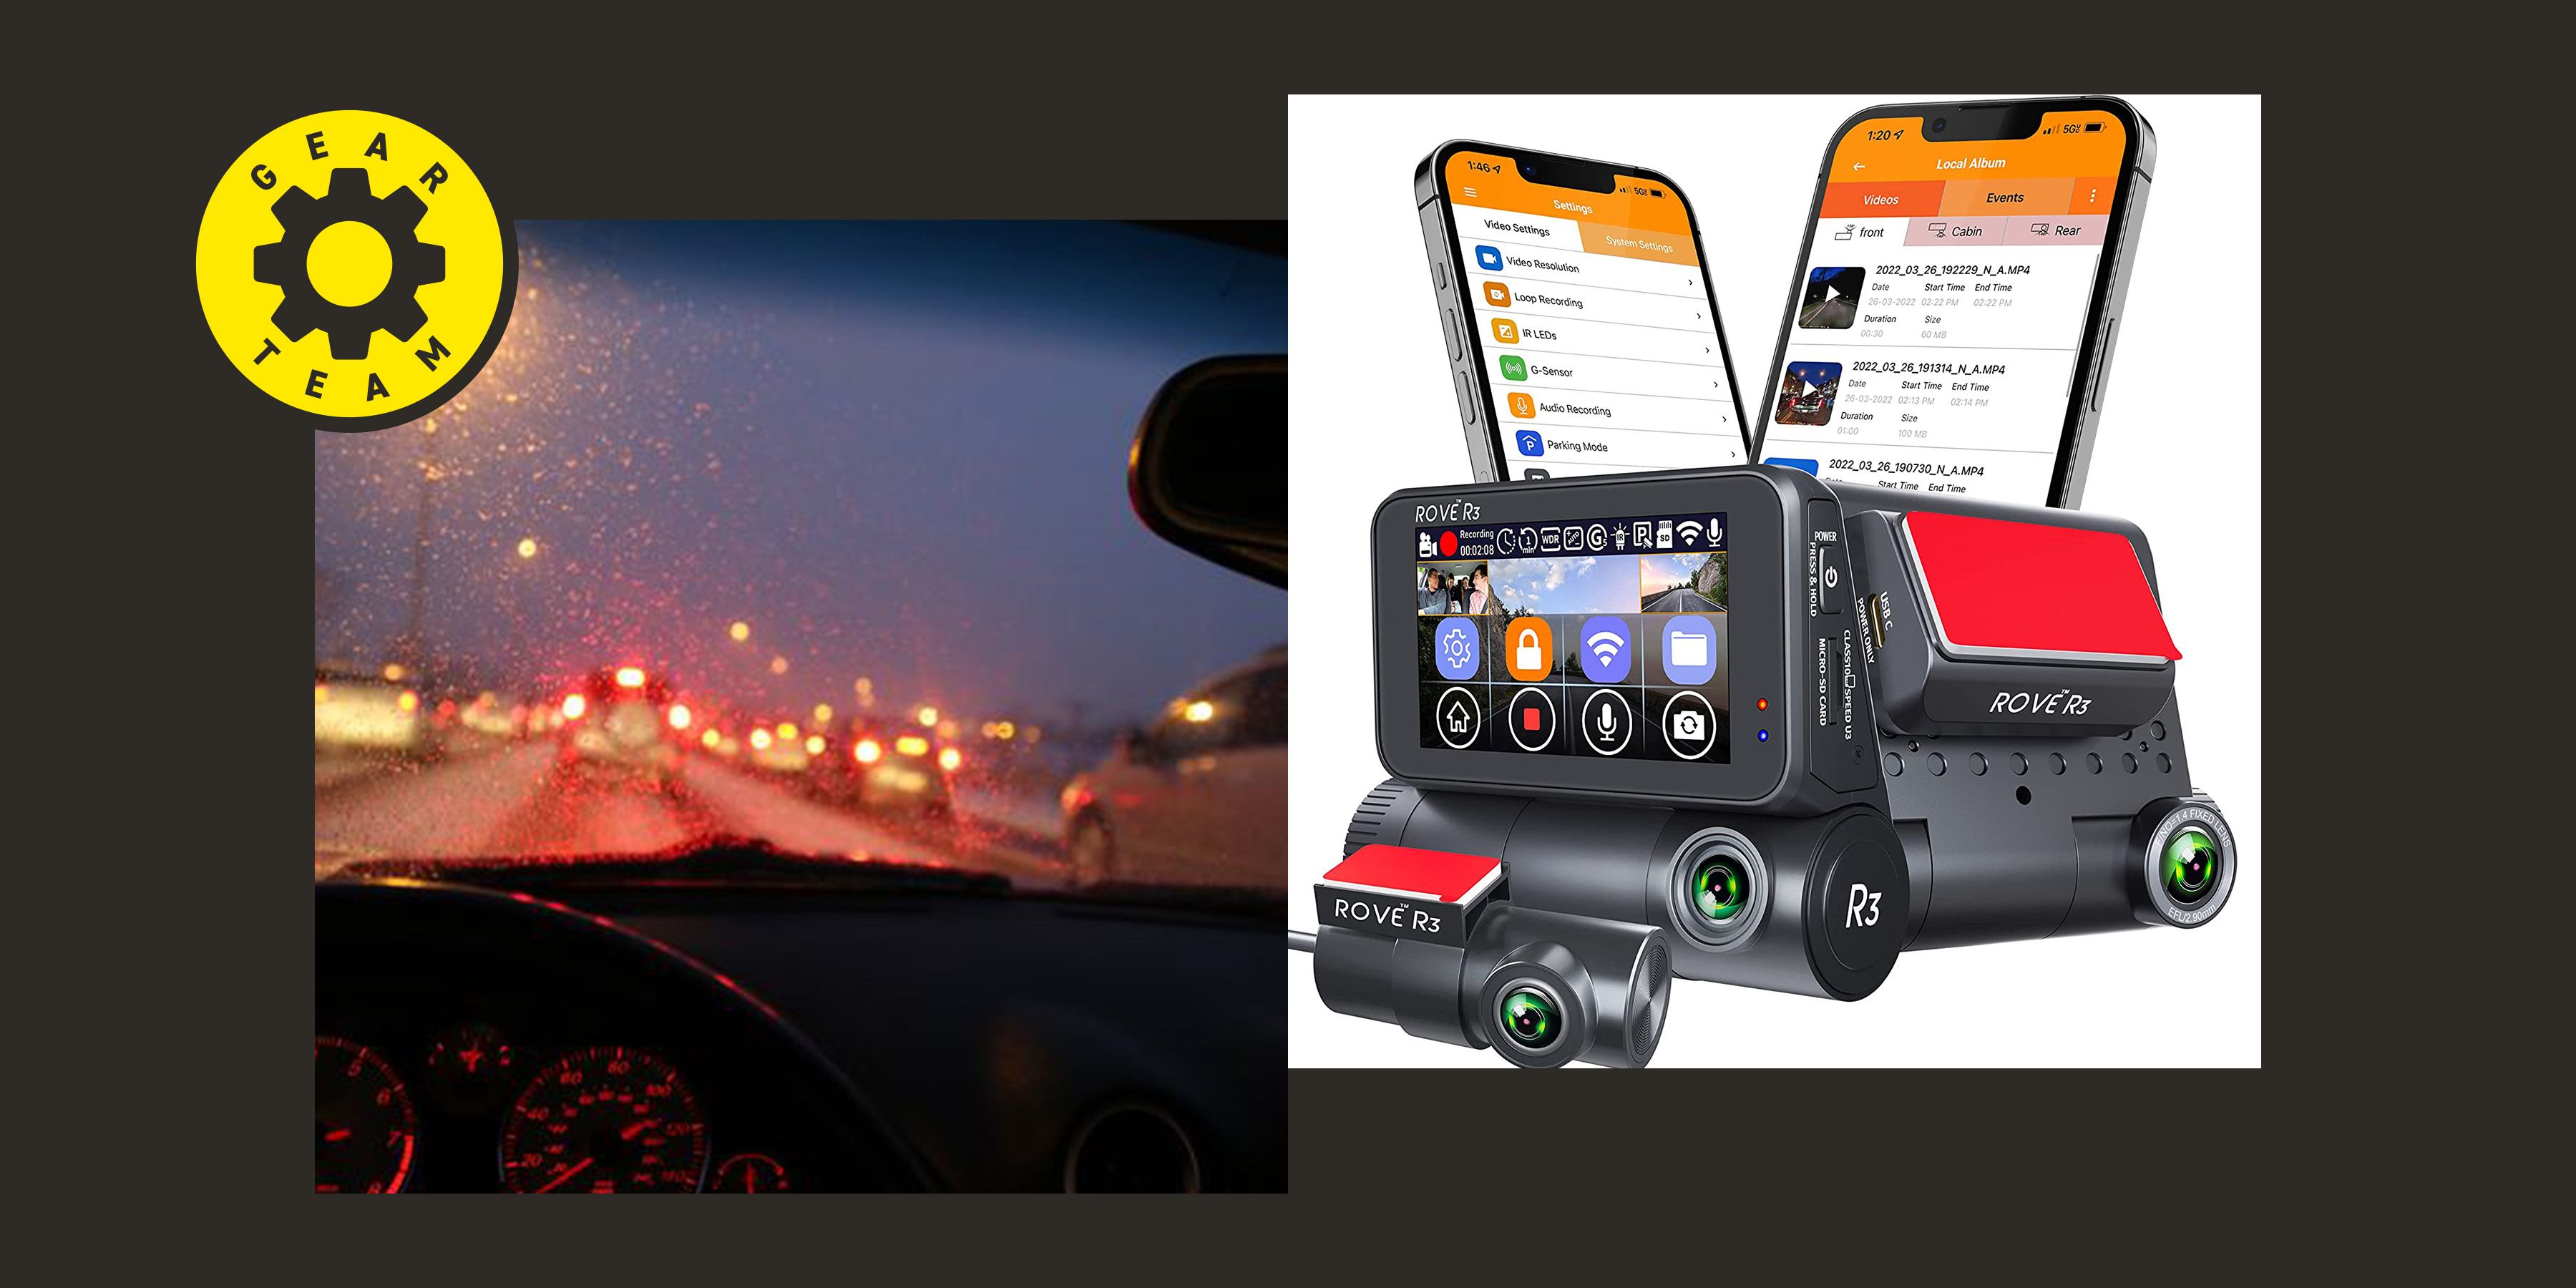 ROVE Dash Cam Family! We are thrilled to introduce our most